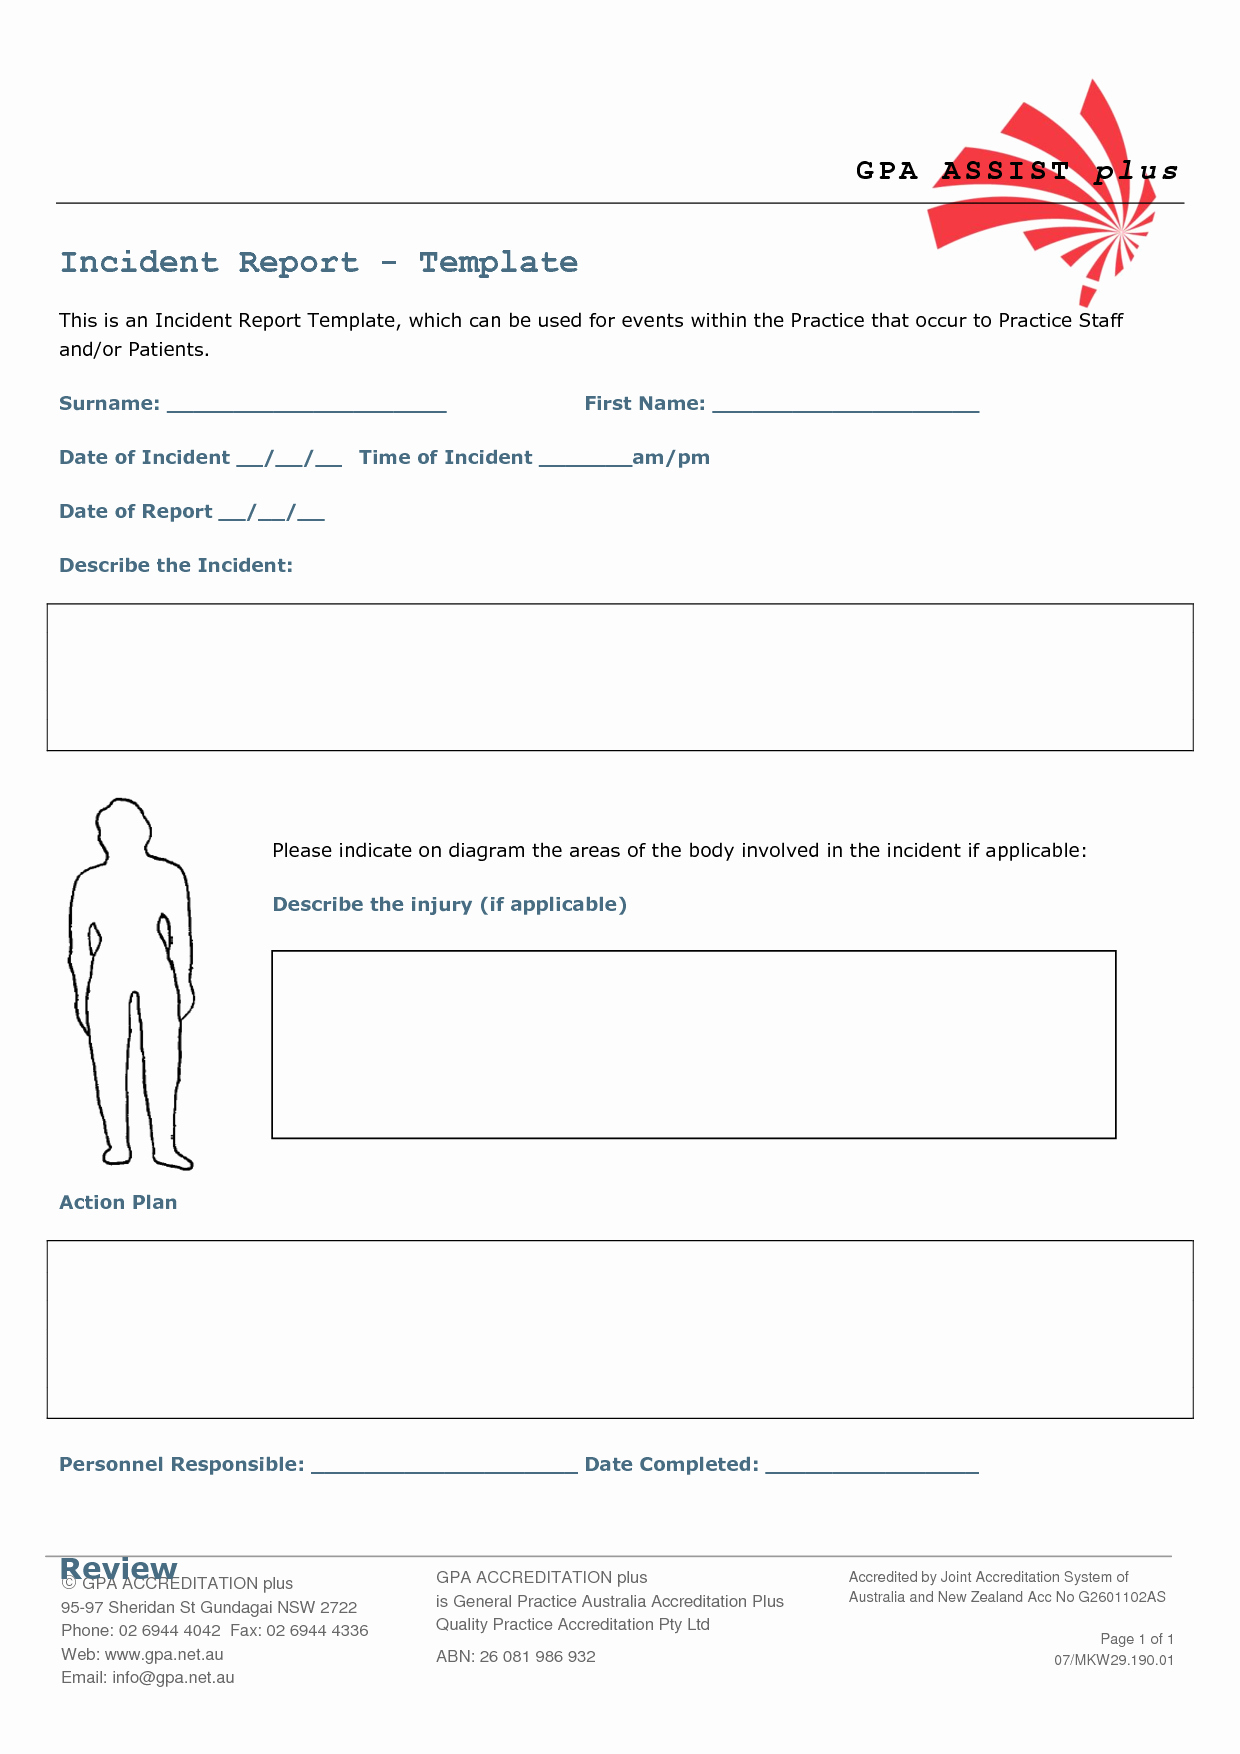 Incident Report Template Microsoft Awesome Incident Report Template Here for A Free Video